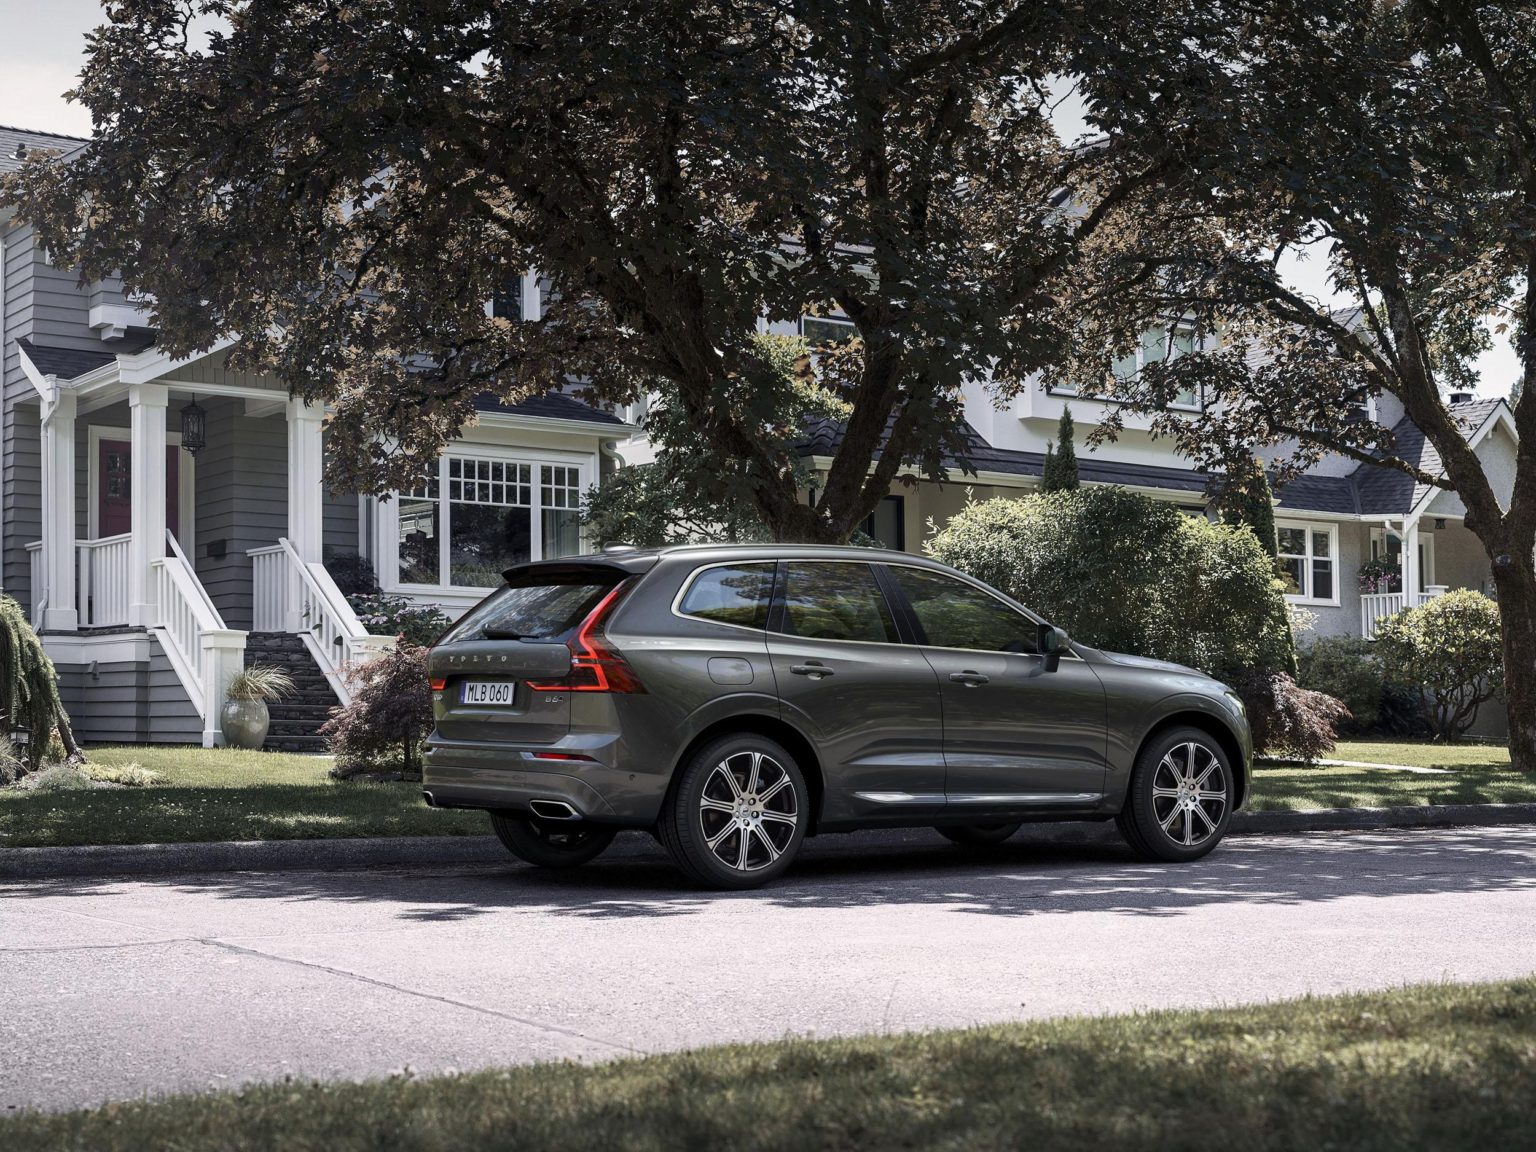 Americans don't like station wagons, but they do love SUVs.